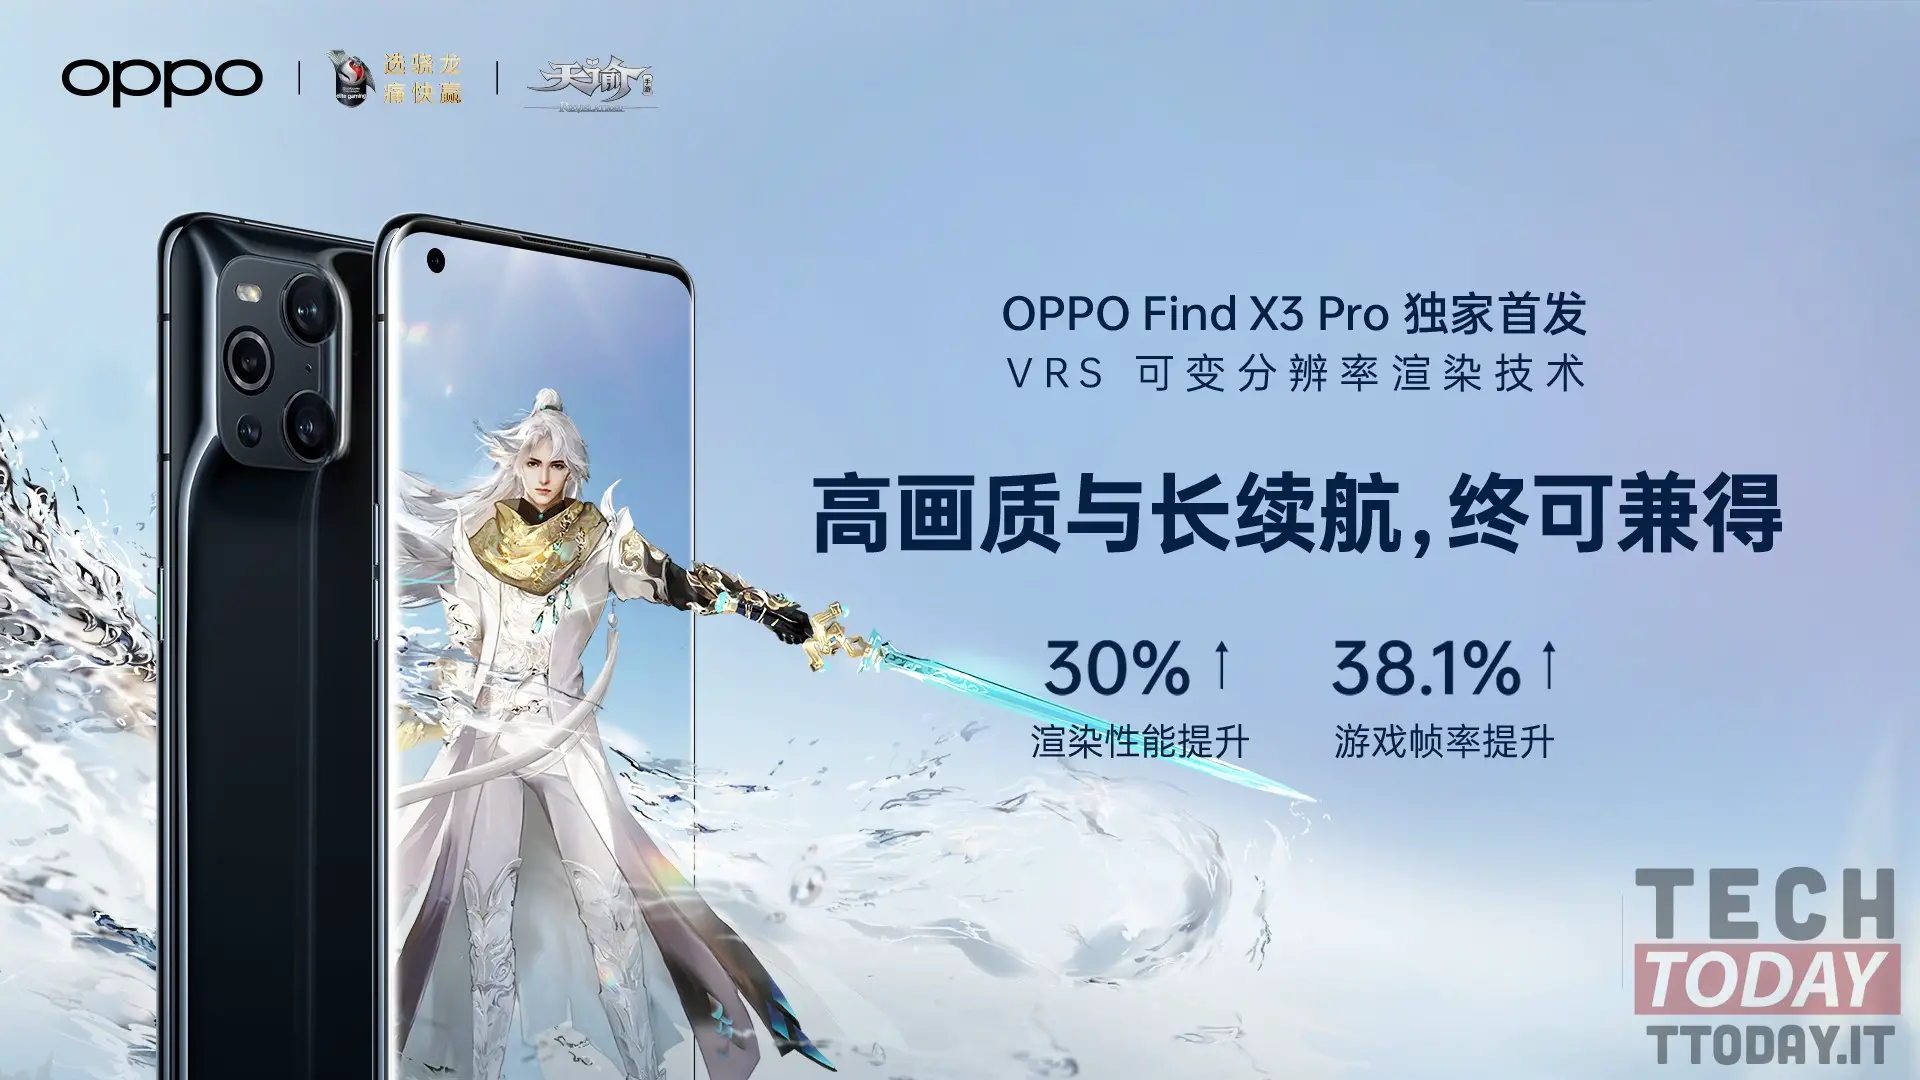 Oppo and Qualcomm introduce rendering technology